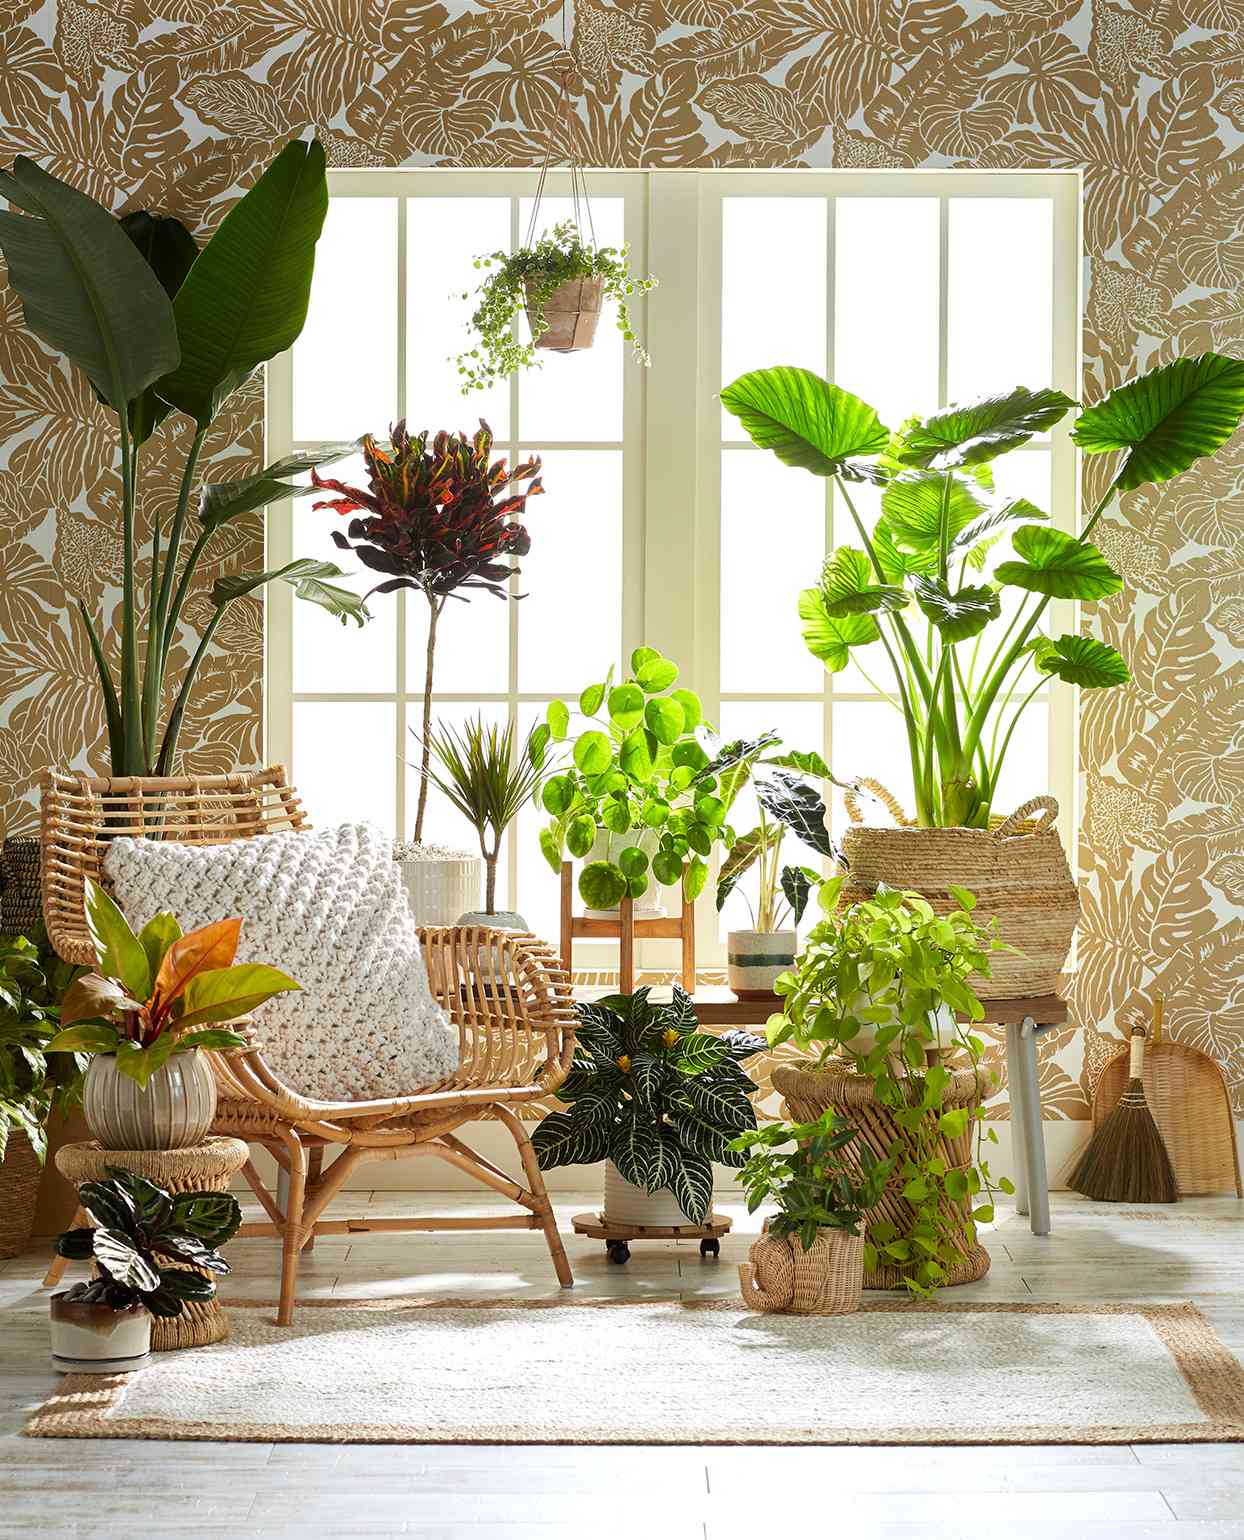 window sitting area filled with plants